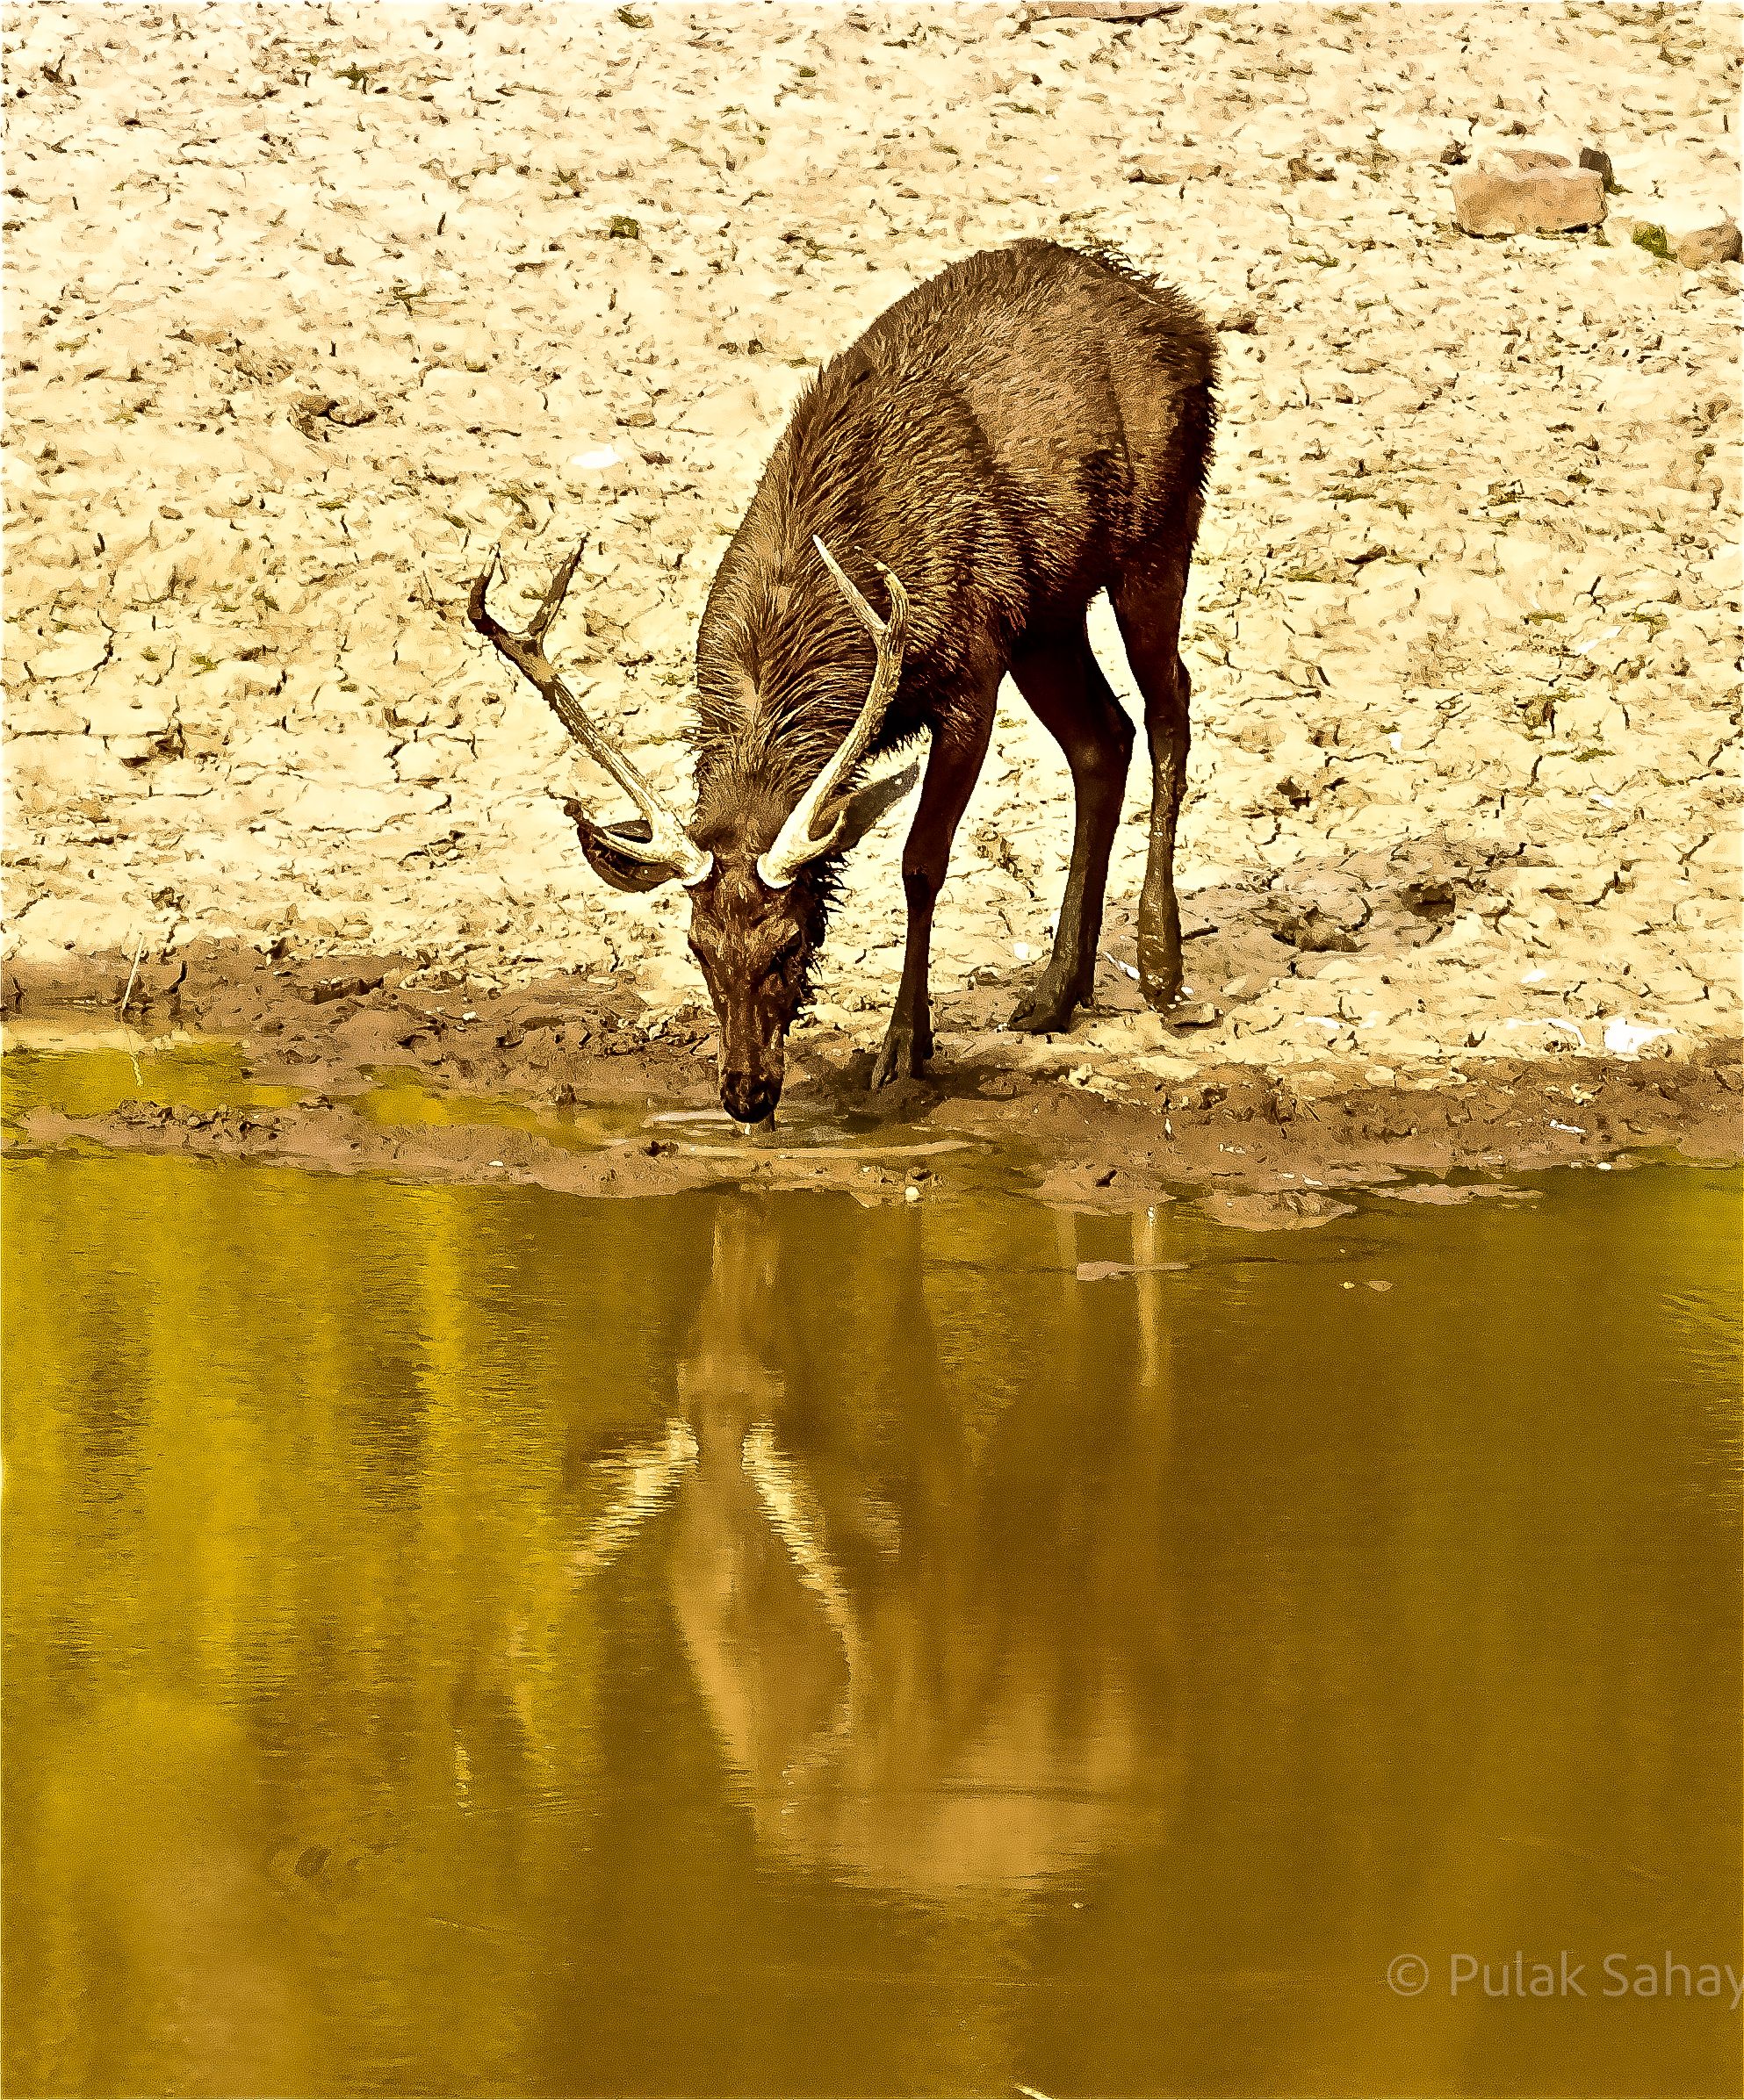 Reflection of a deer drinking